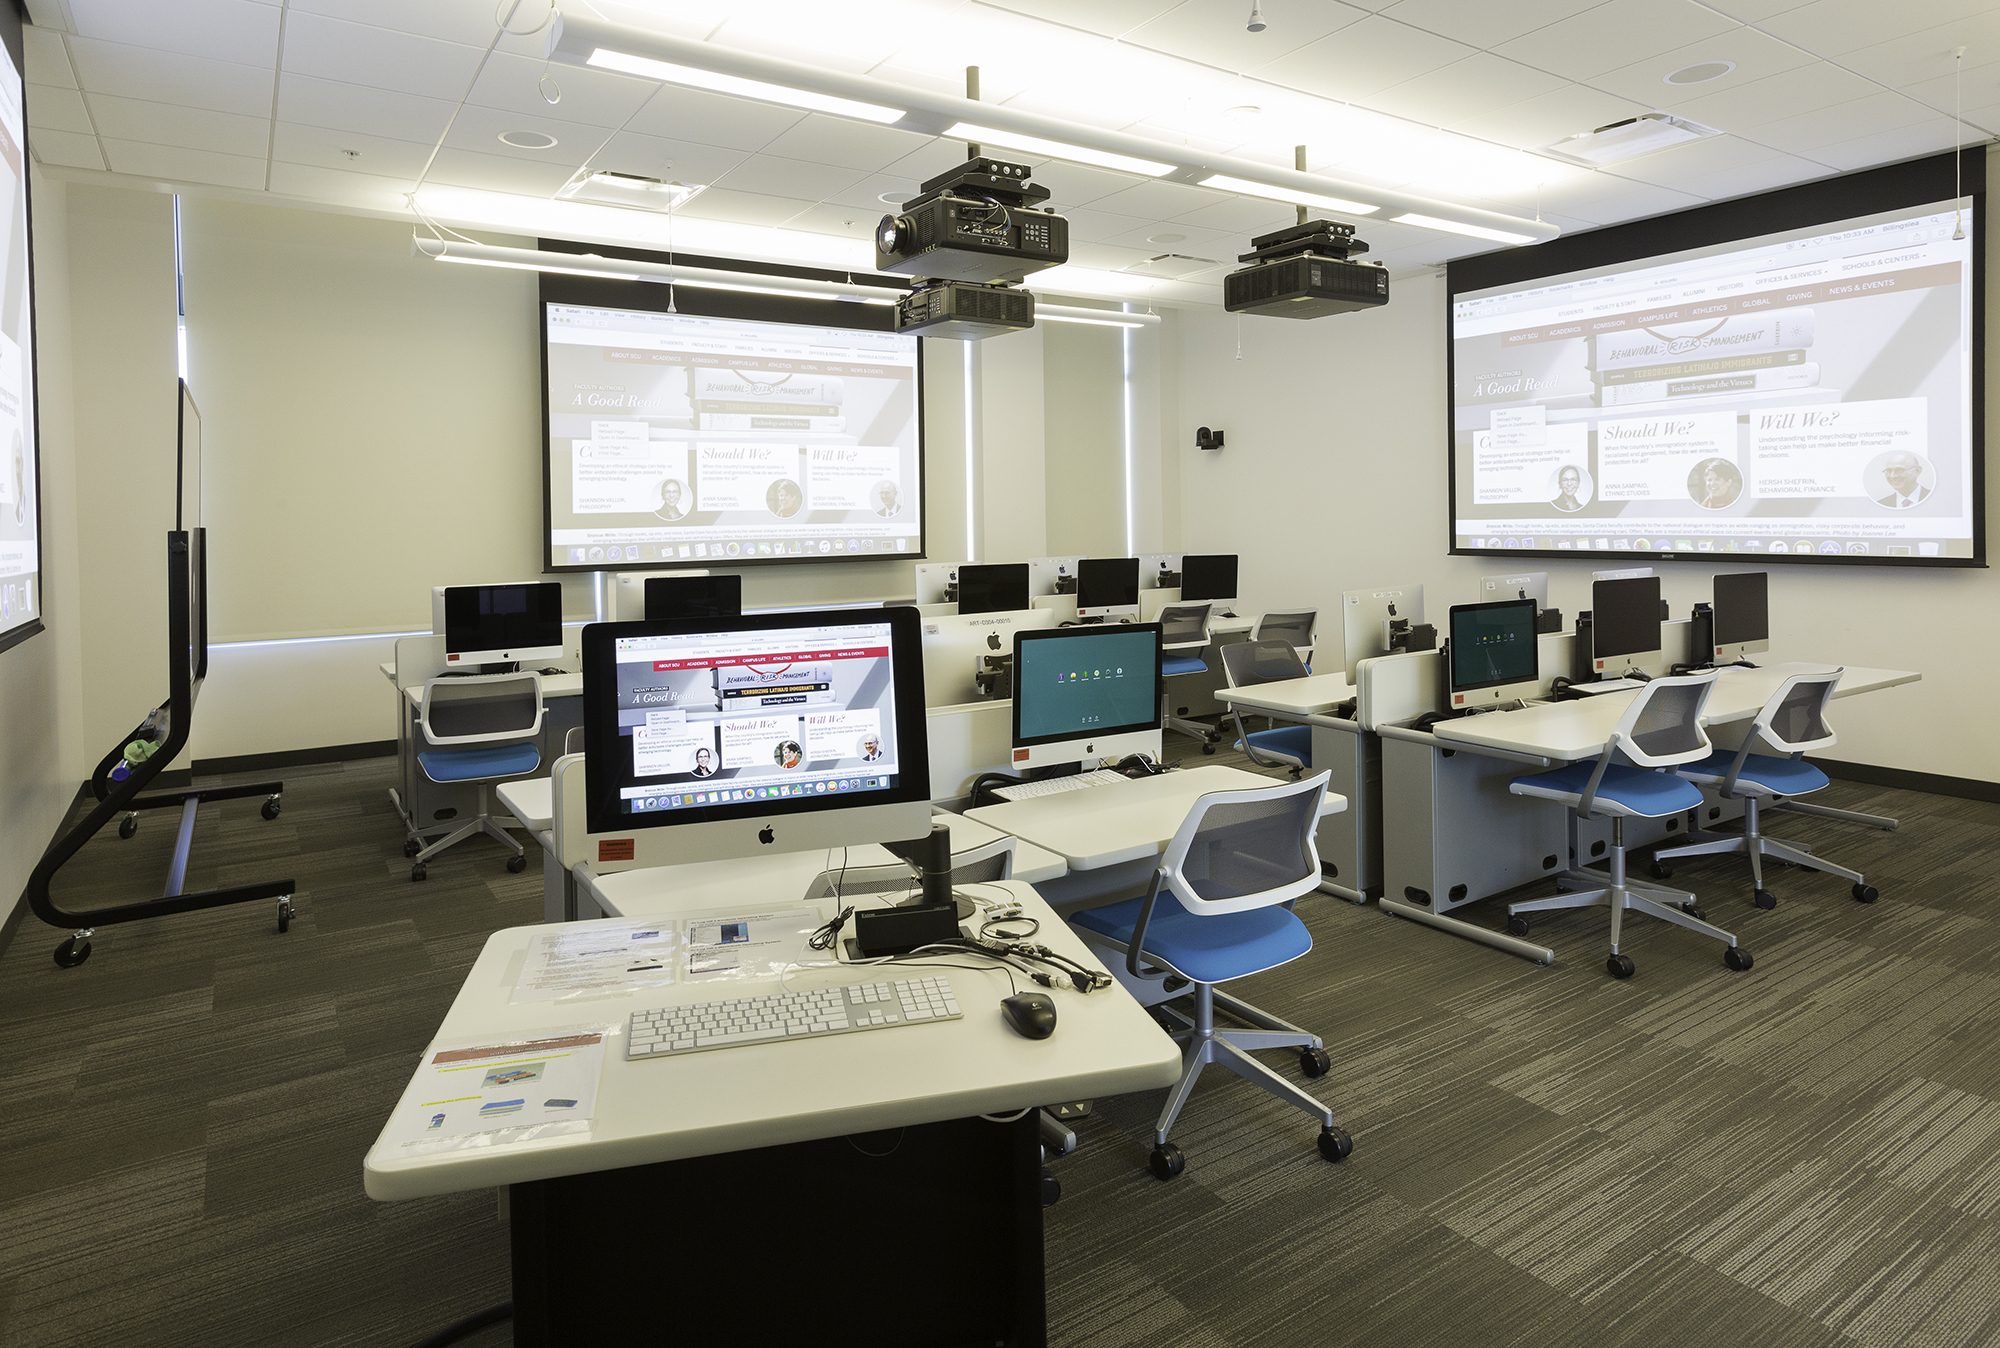 Classroom with videoconferencing equipment